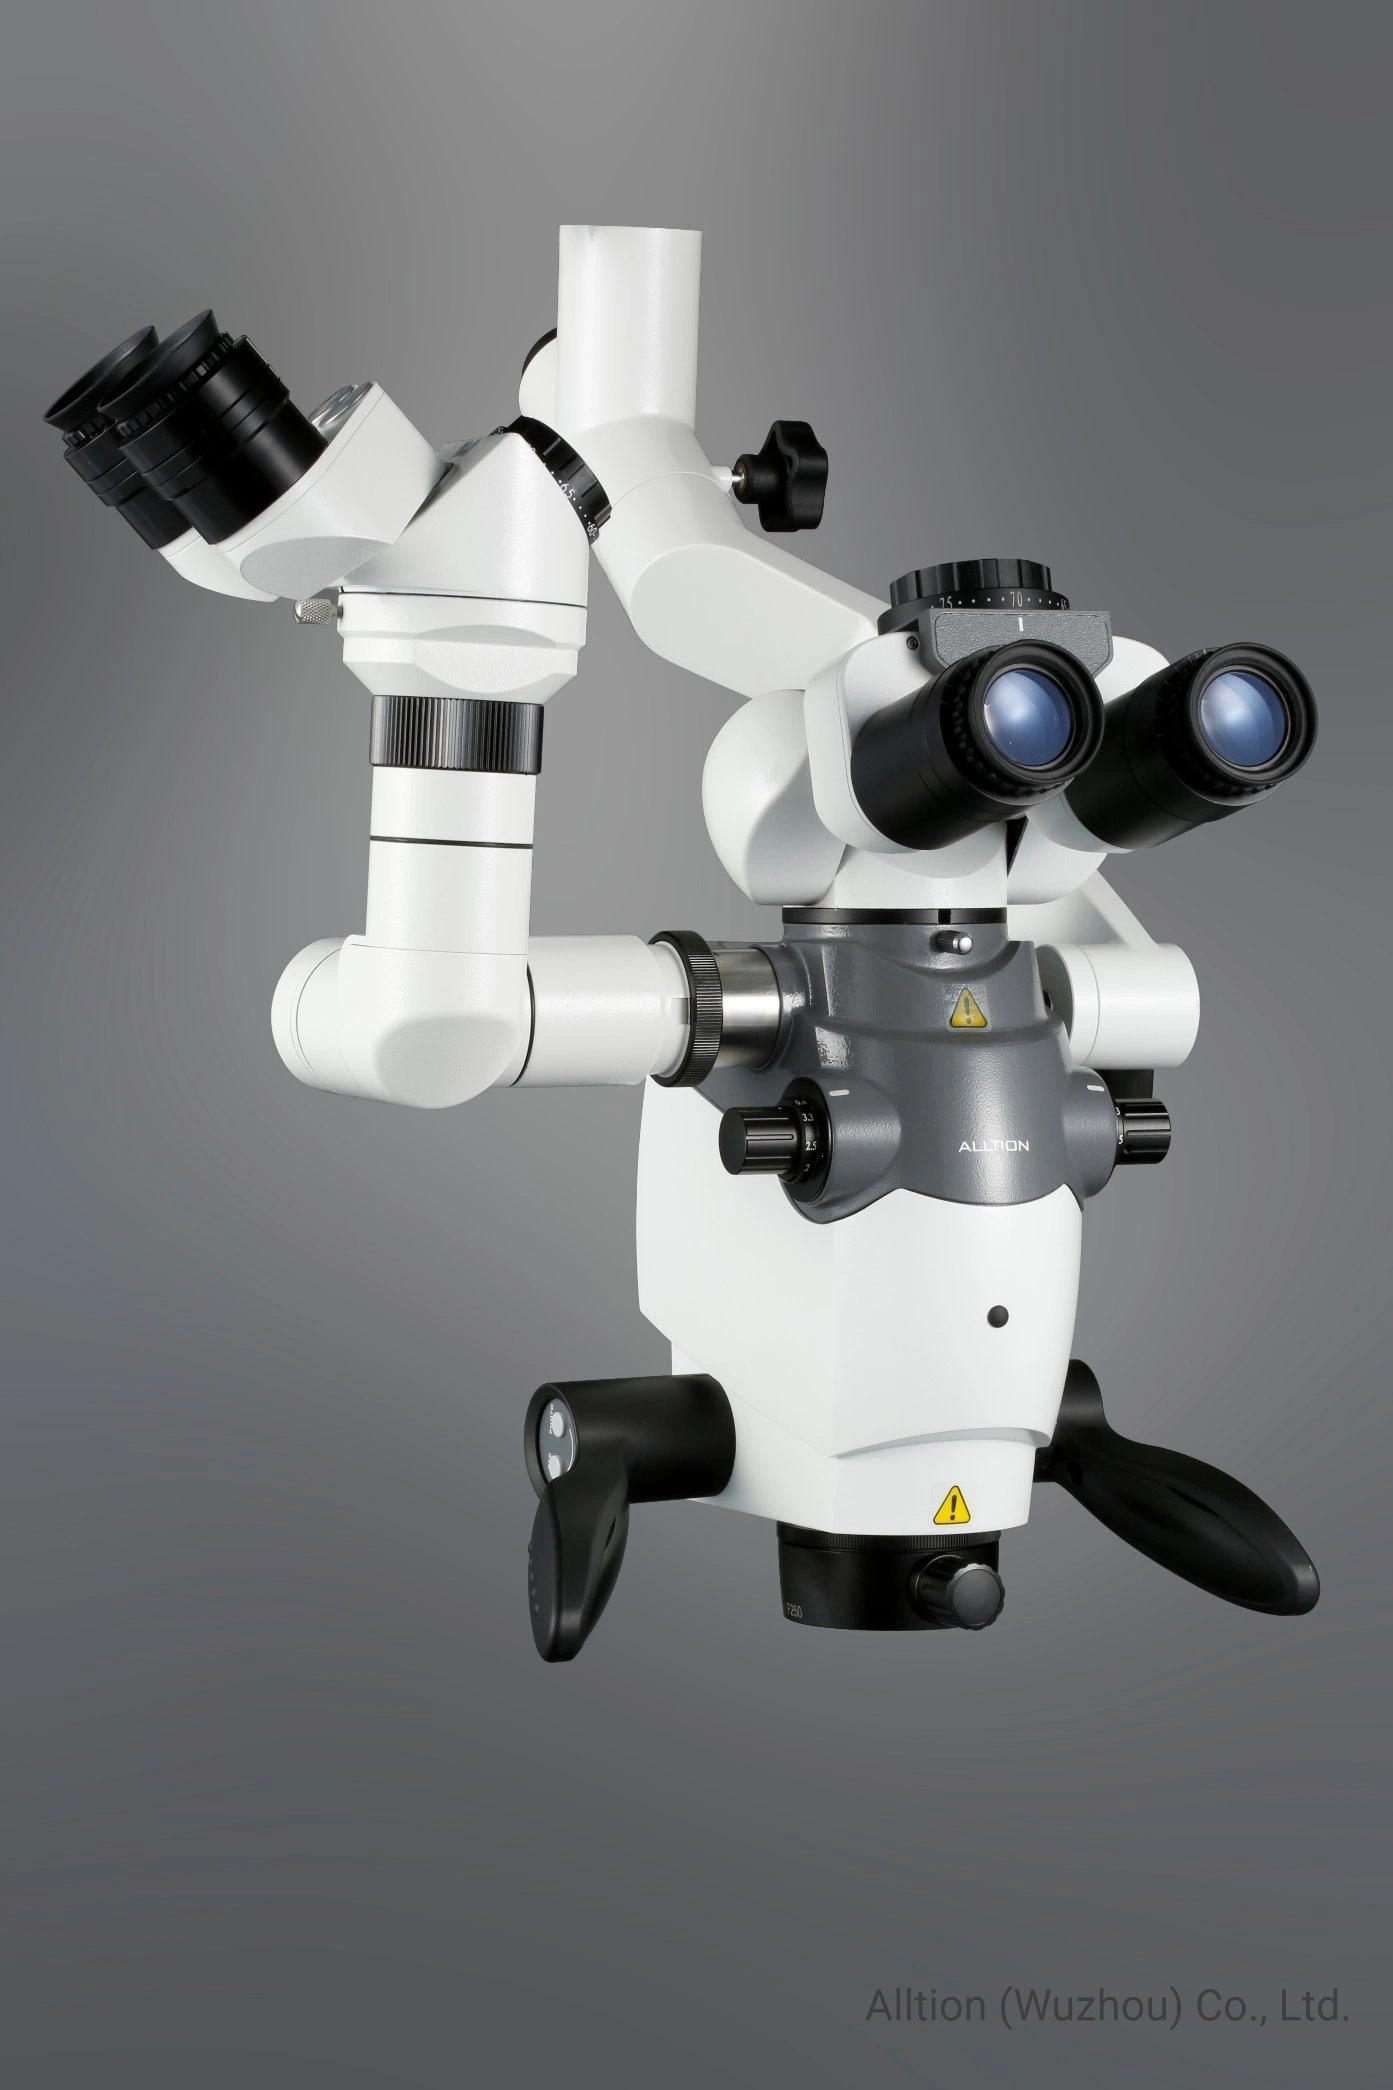 Am-6000 Zoom Surgical Surgery Operation Operating Microscope for Ent